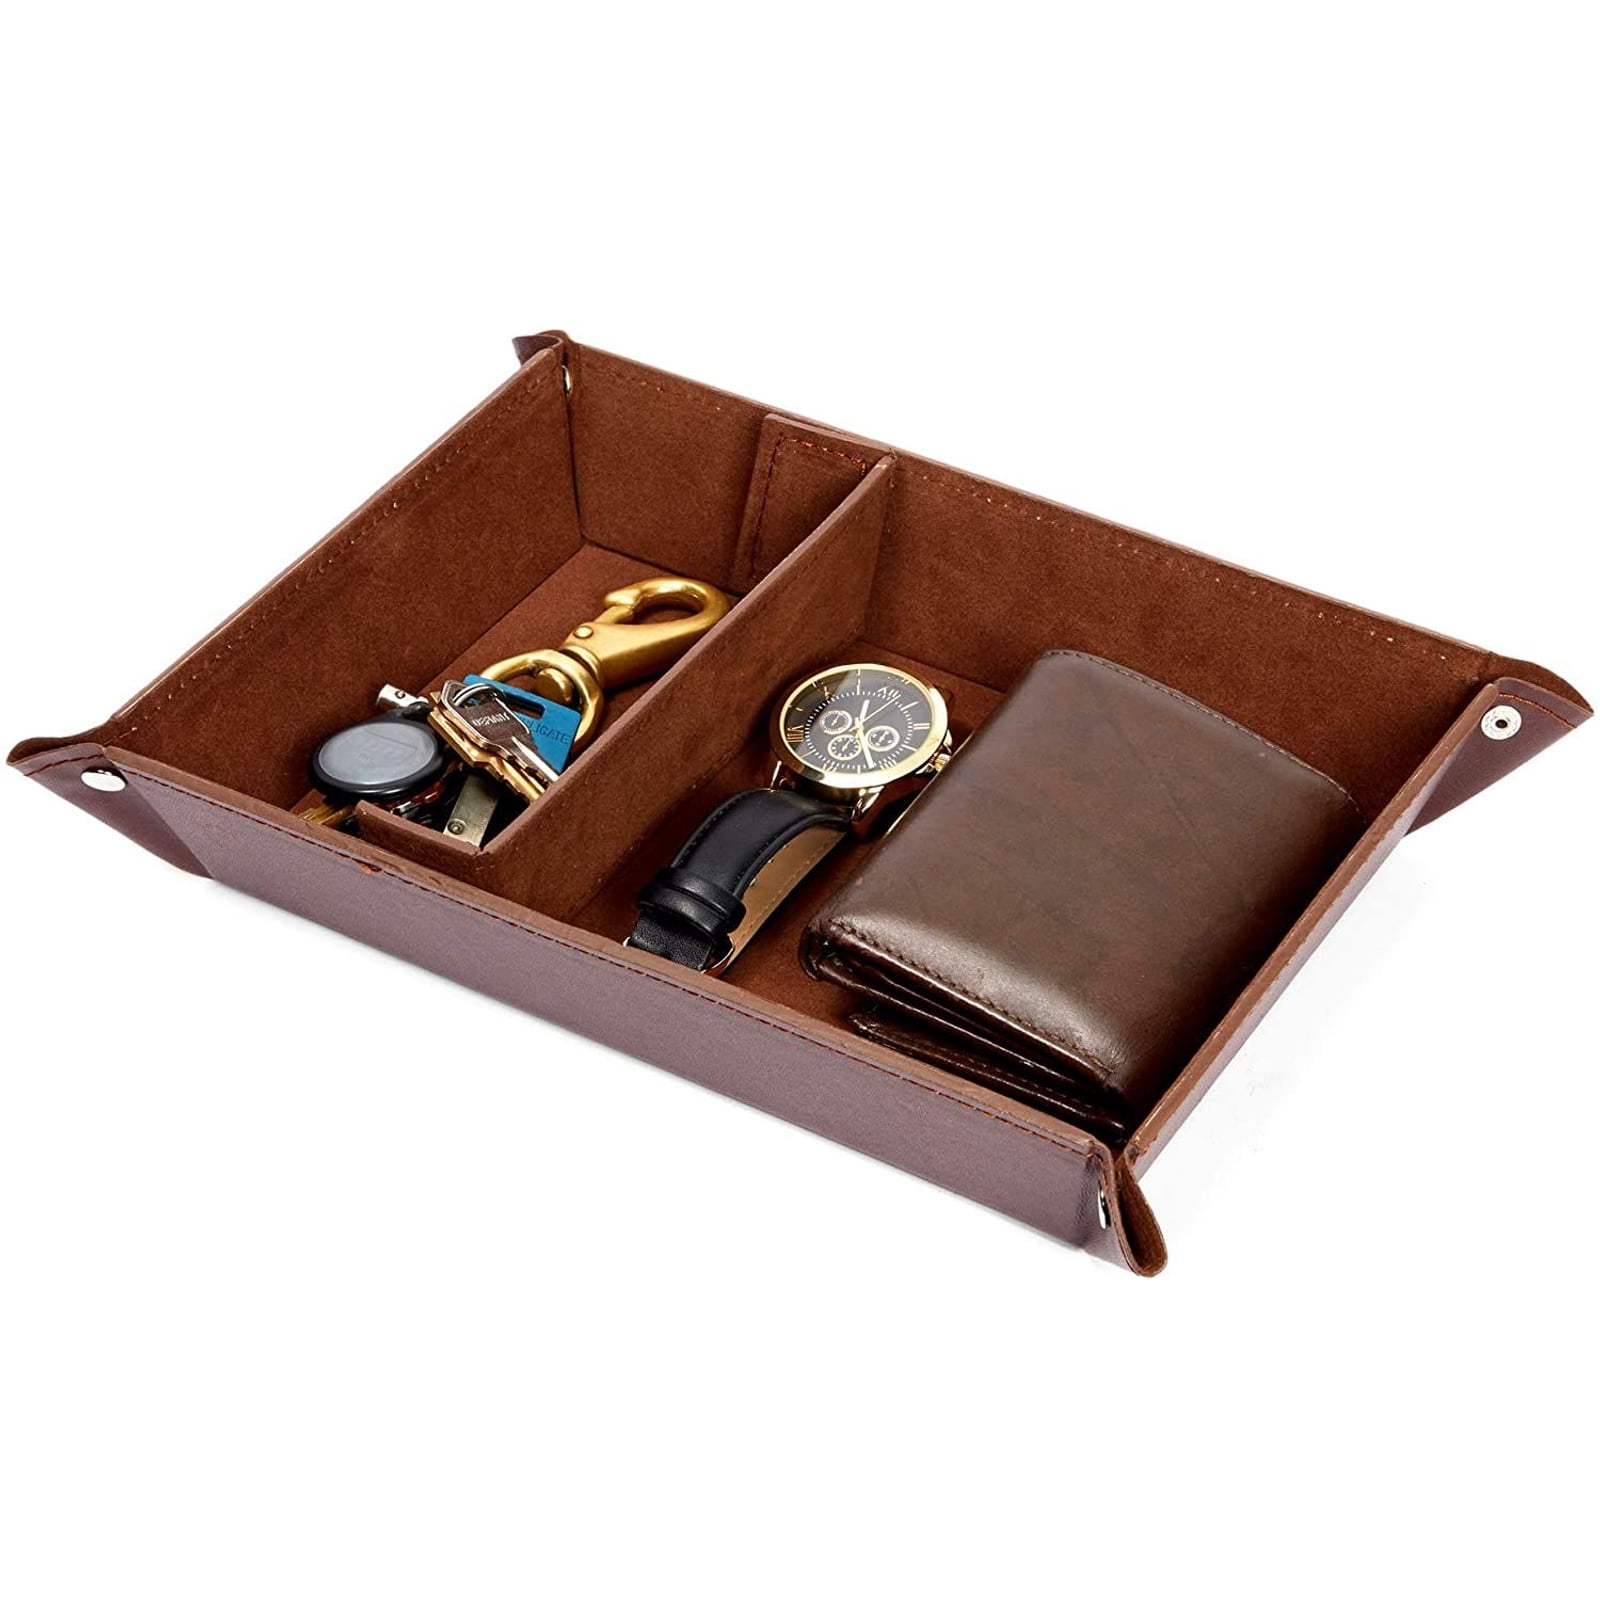 Valet Tray Leather Catchall Jewelry Tray Bedside Tray Key Phone Coin Change Watches and Candy Holder Sundries Entryway Tray,Girl With Blue Hair